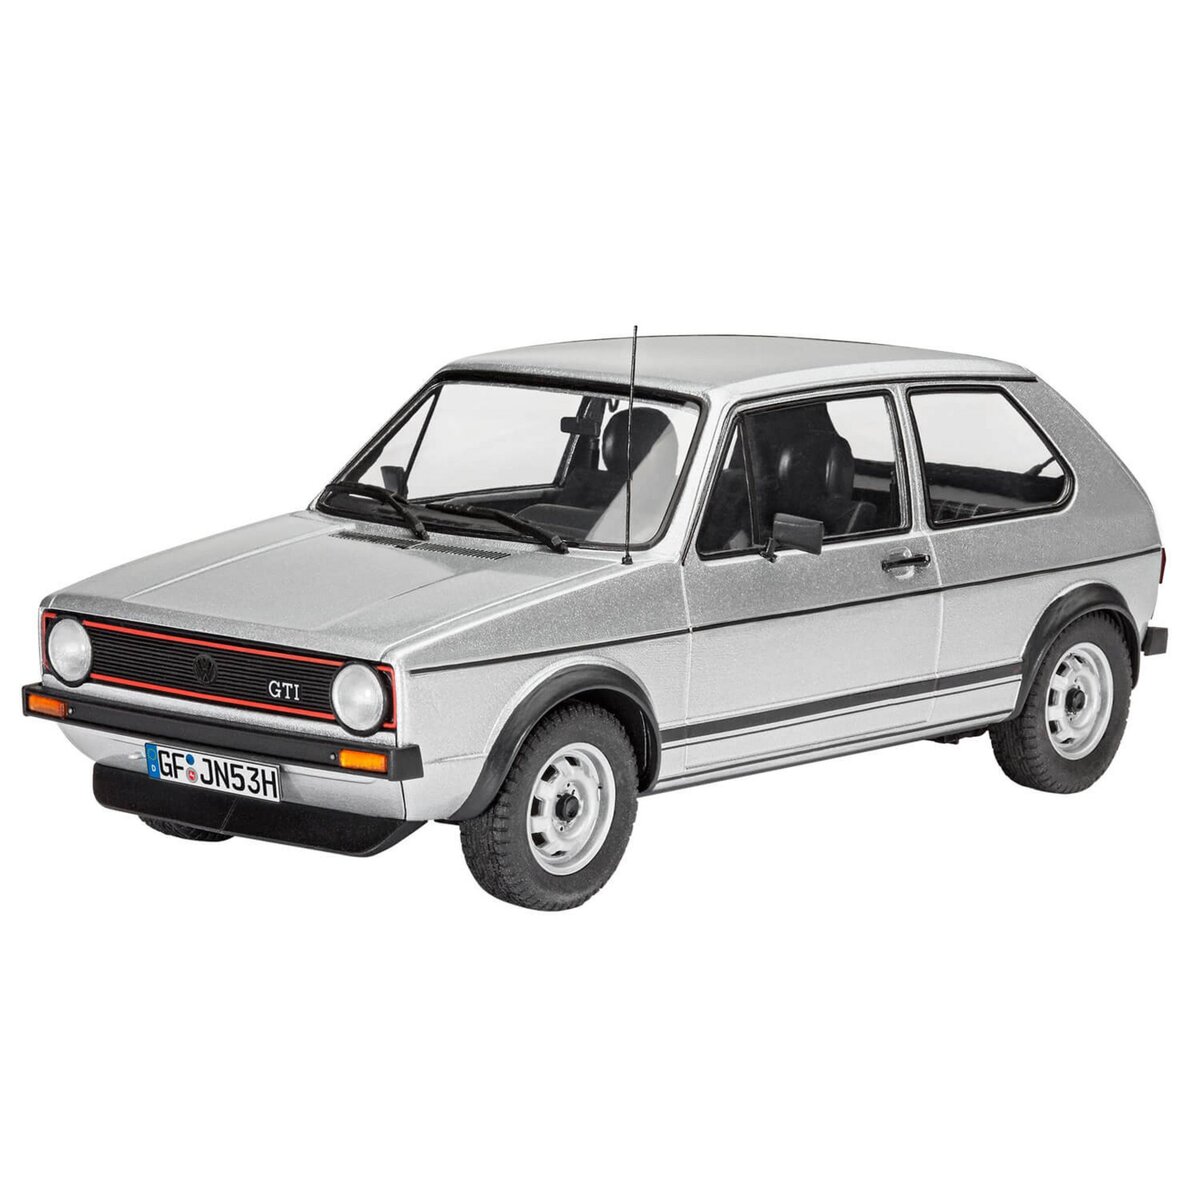 Revell Maquette voiture : VW Golf 1 GTI